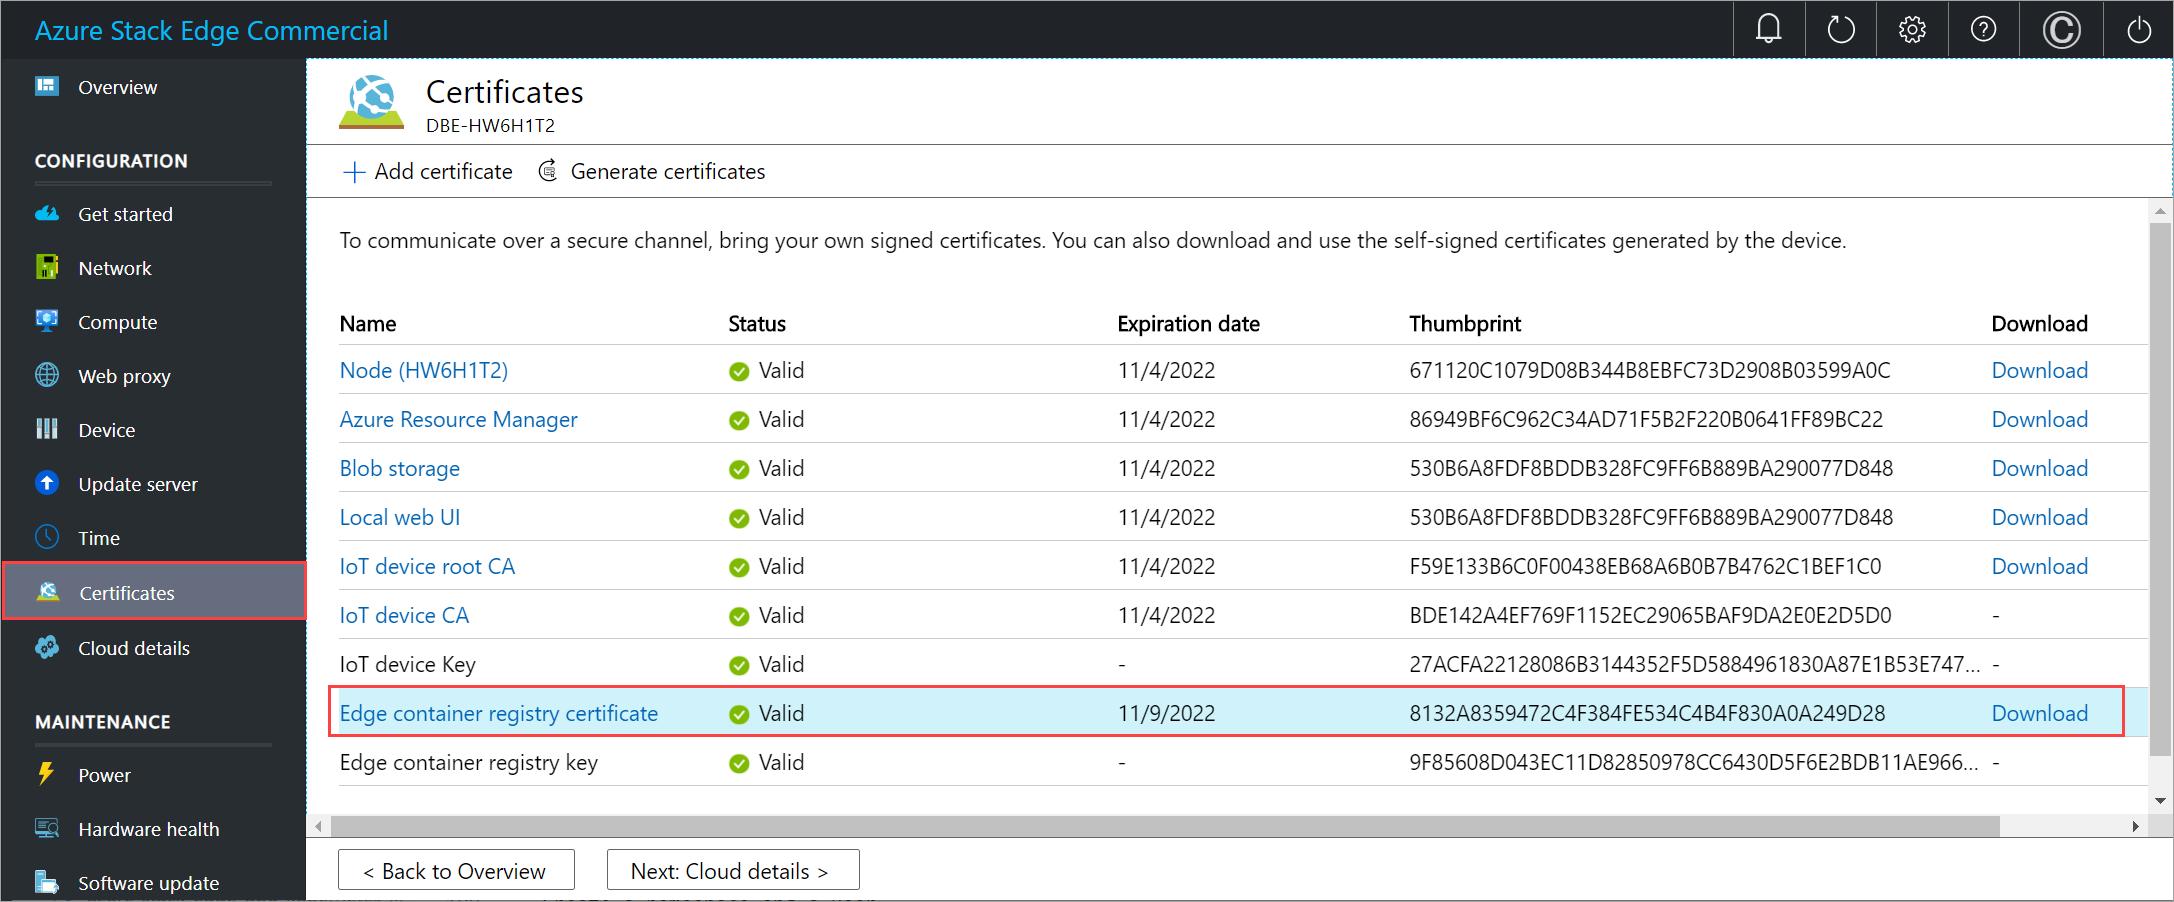 Download Edge container registry endpoint certificate